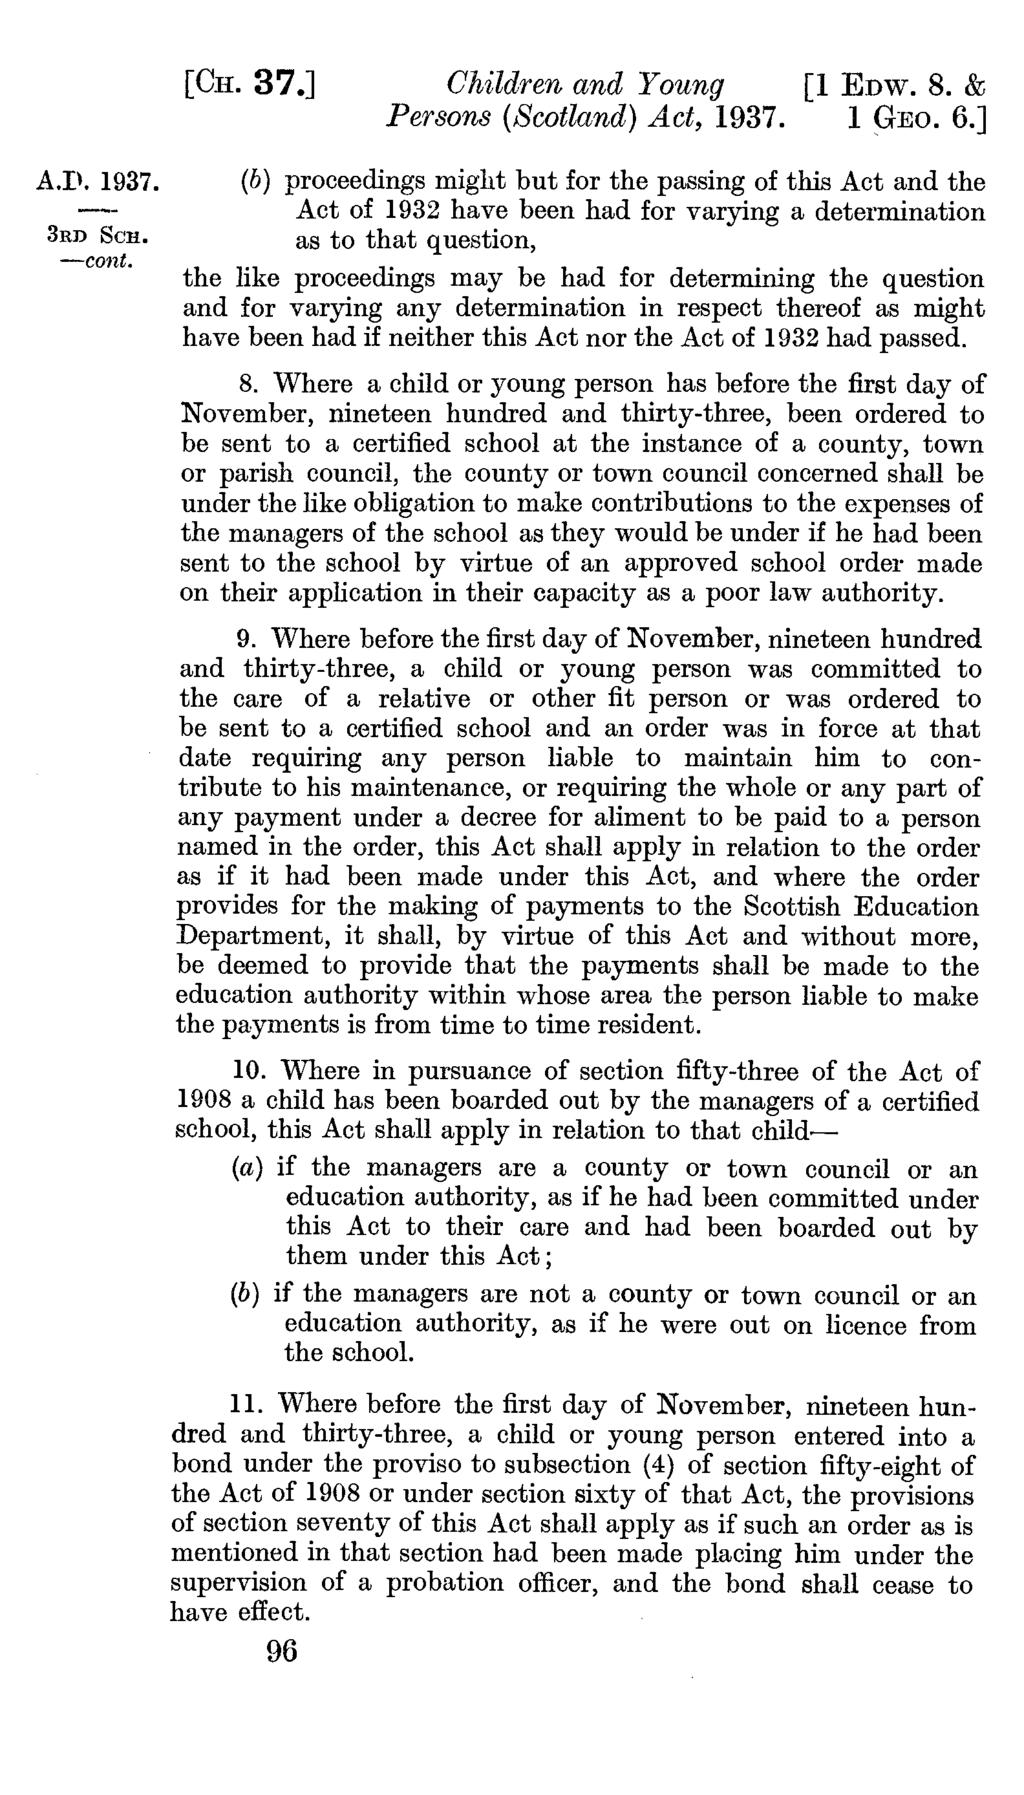 3RD SGH. -coat. [Cx. 37.] Children and Young [1 EDW. 8. & Persons (Scotland) Act, 1937. 1 GEO. 6.